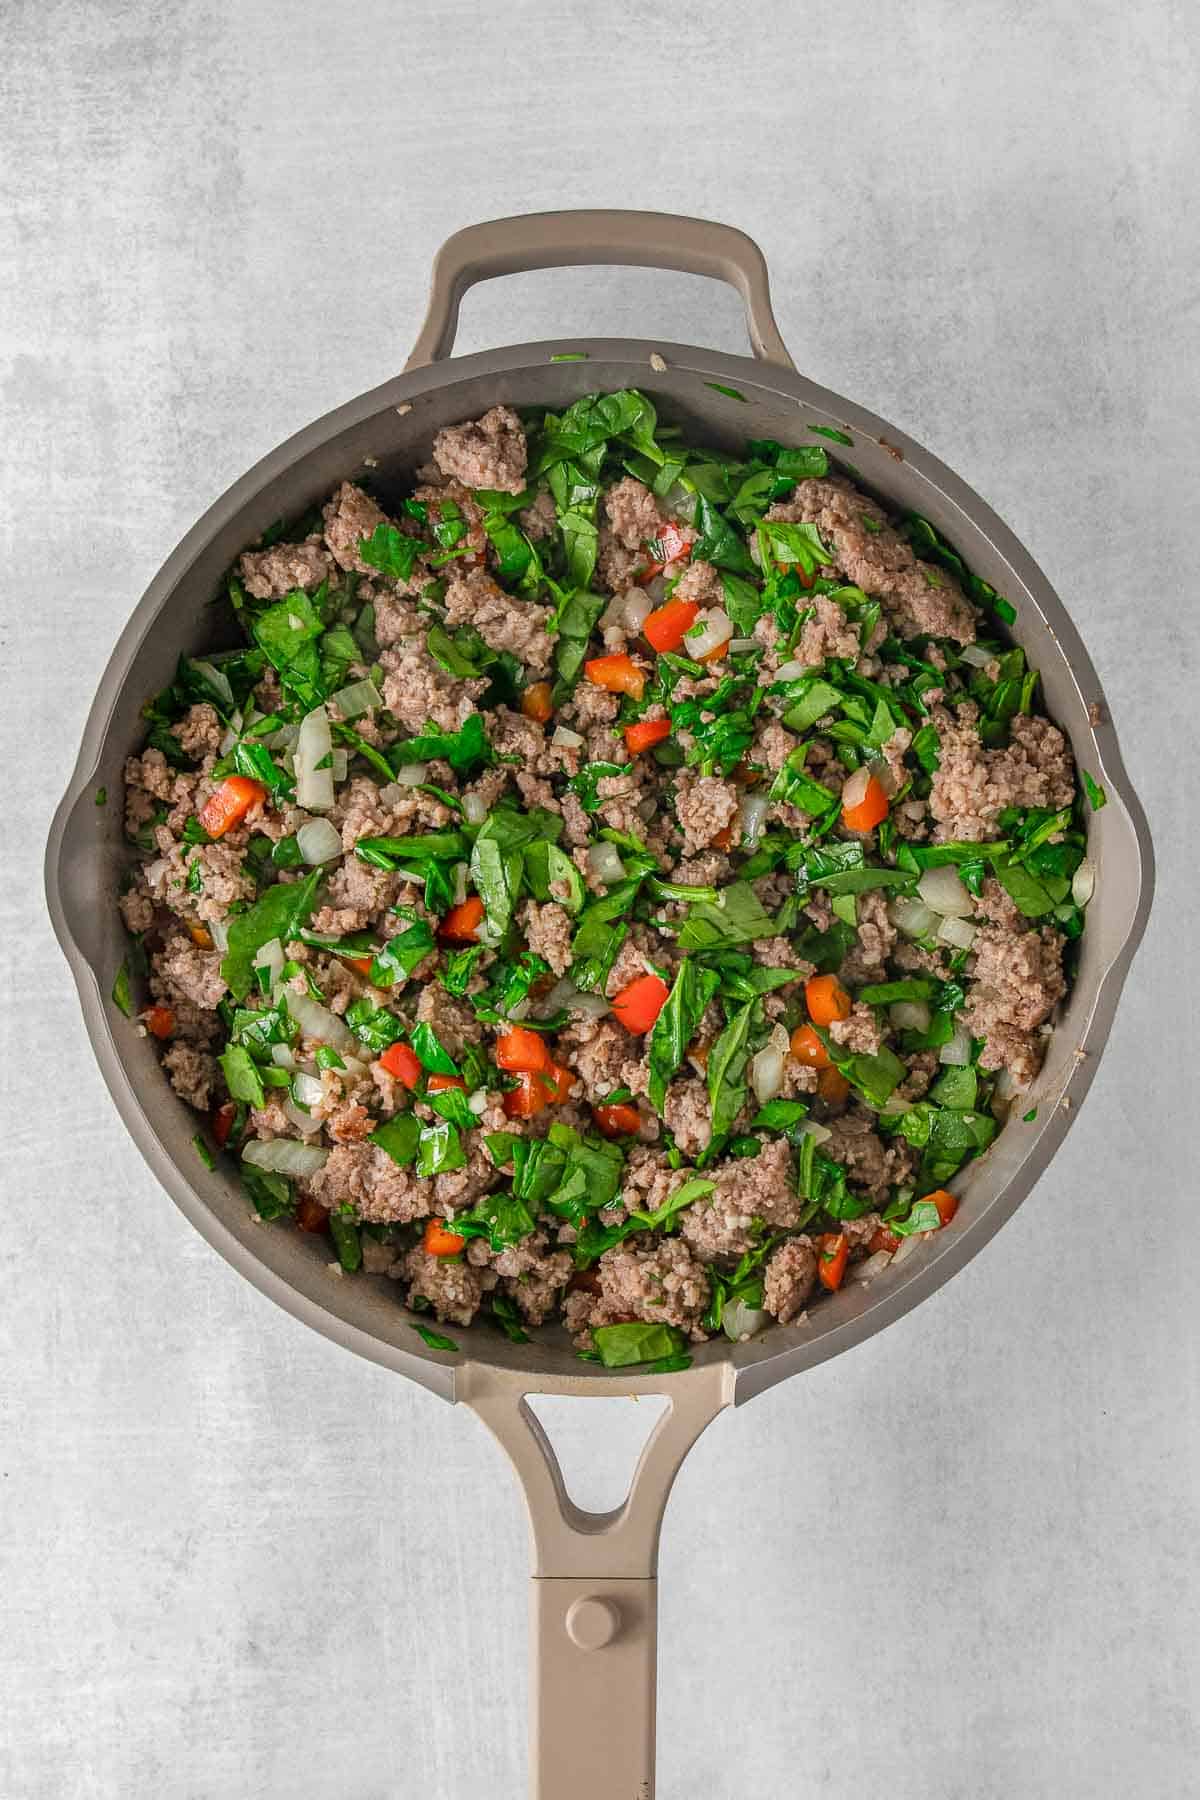 Large skillet with cooked sausage, red bell pepper, onion and garlic mixture topped with spinach.